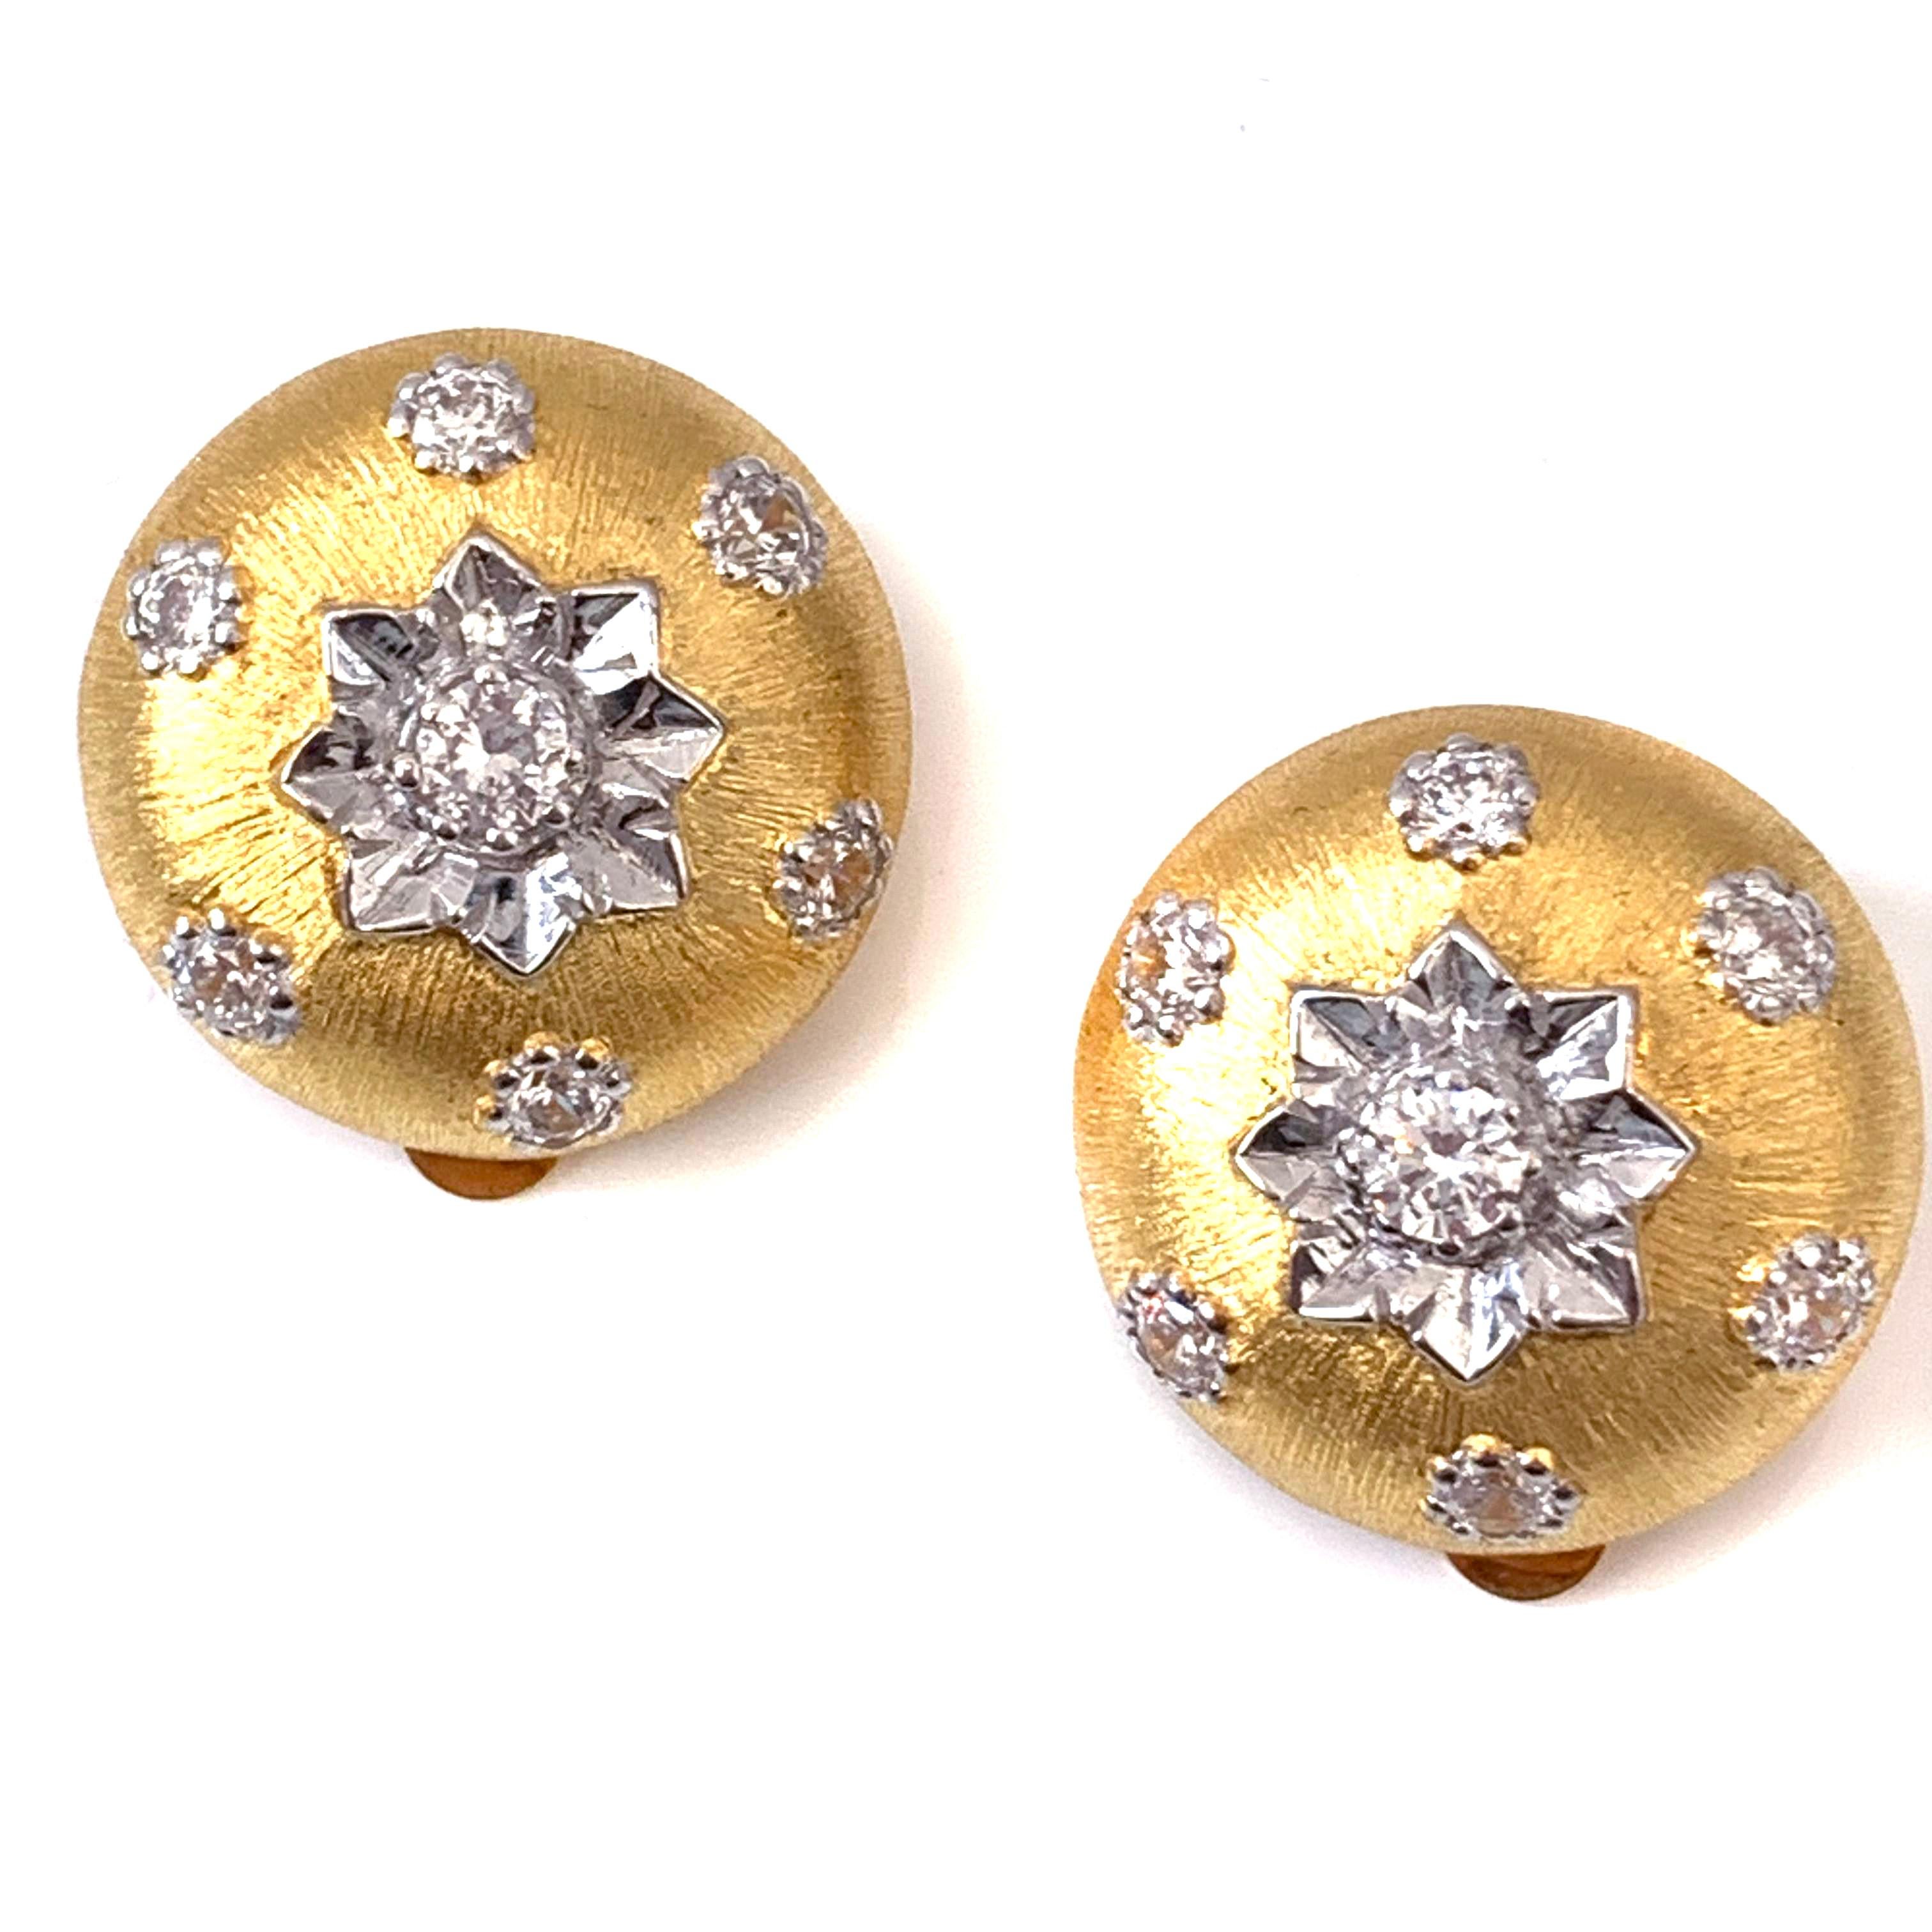 Stunning Hand-engraved Flower Pattern Round Clip-on Earrings.

These elegant button earrings feature top quality round simulated diamonds handset in 18k yellow gold vermeil over sterling silver, handmade engraved flowers in center, and handcrafted